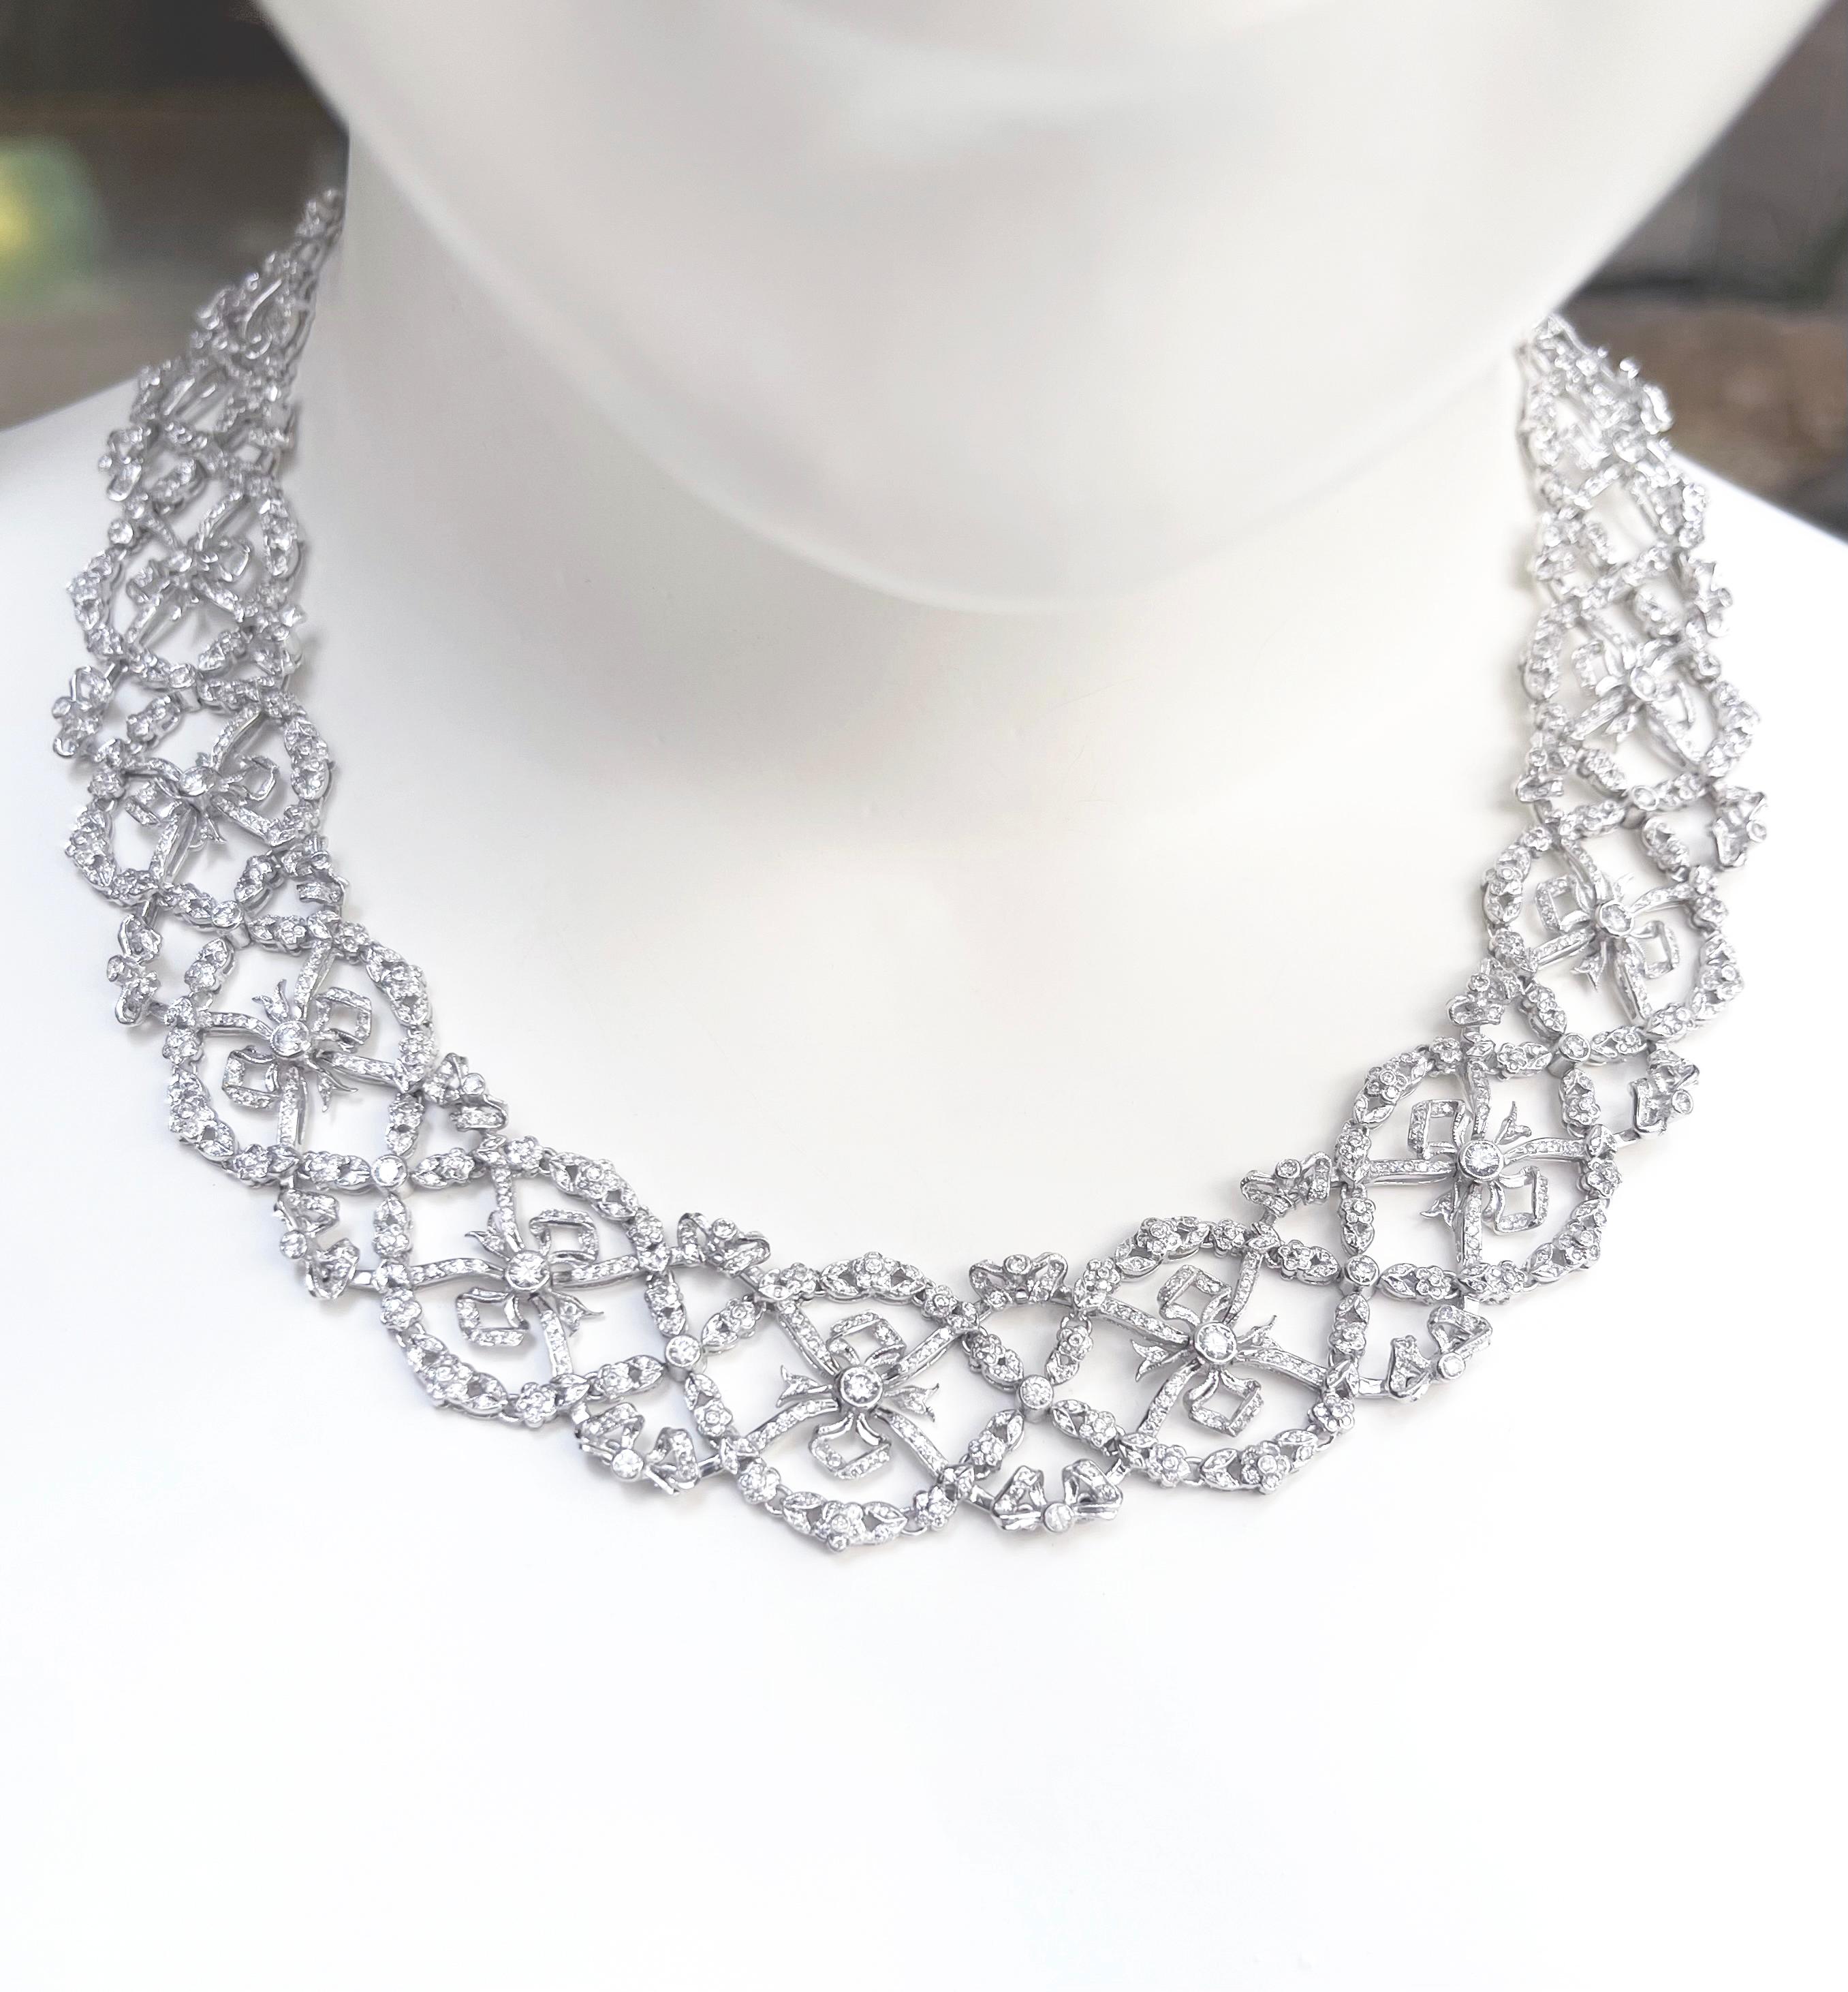 Diamond 8.50 carats Necklace set in 18K White Gold Settings

Width: 2.2 cm 
Length: 44 cm
Total Weight: 77.37 grams

